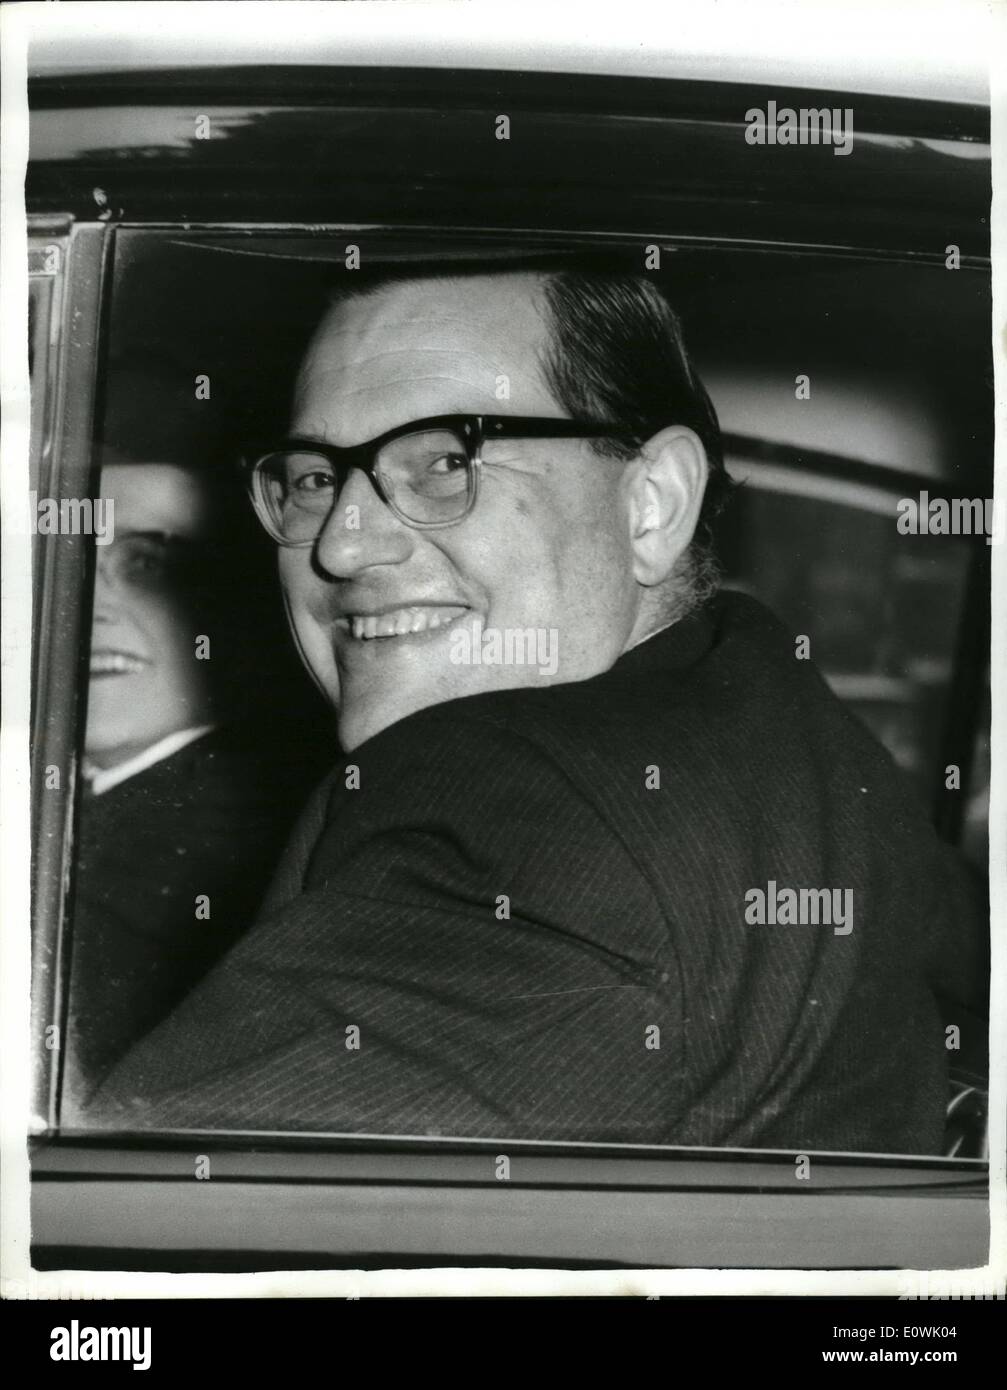 Apr. 03, 1963 - 3-4-63 Reginald Maudling Budget Day. Mr. Maudling's first budget. Today, Mr. Maudling presents his first budget as Chancellor of the Exchequer. Photo Shows: A smiling Mr. Maudling arrives at the House of Commons this afternoon. Stock Photo